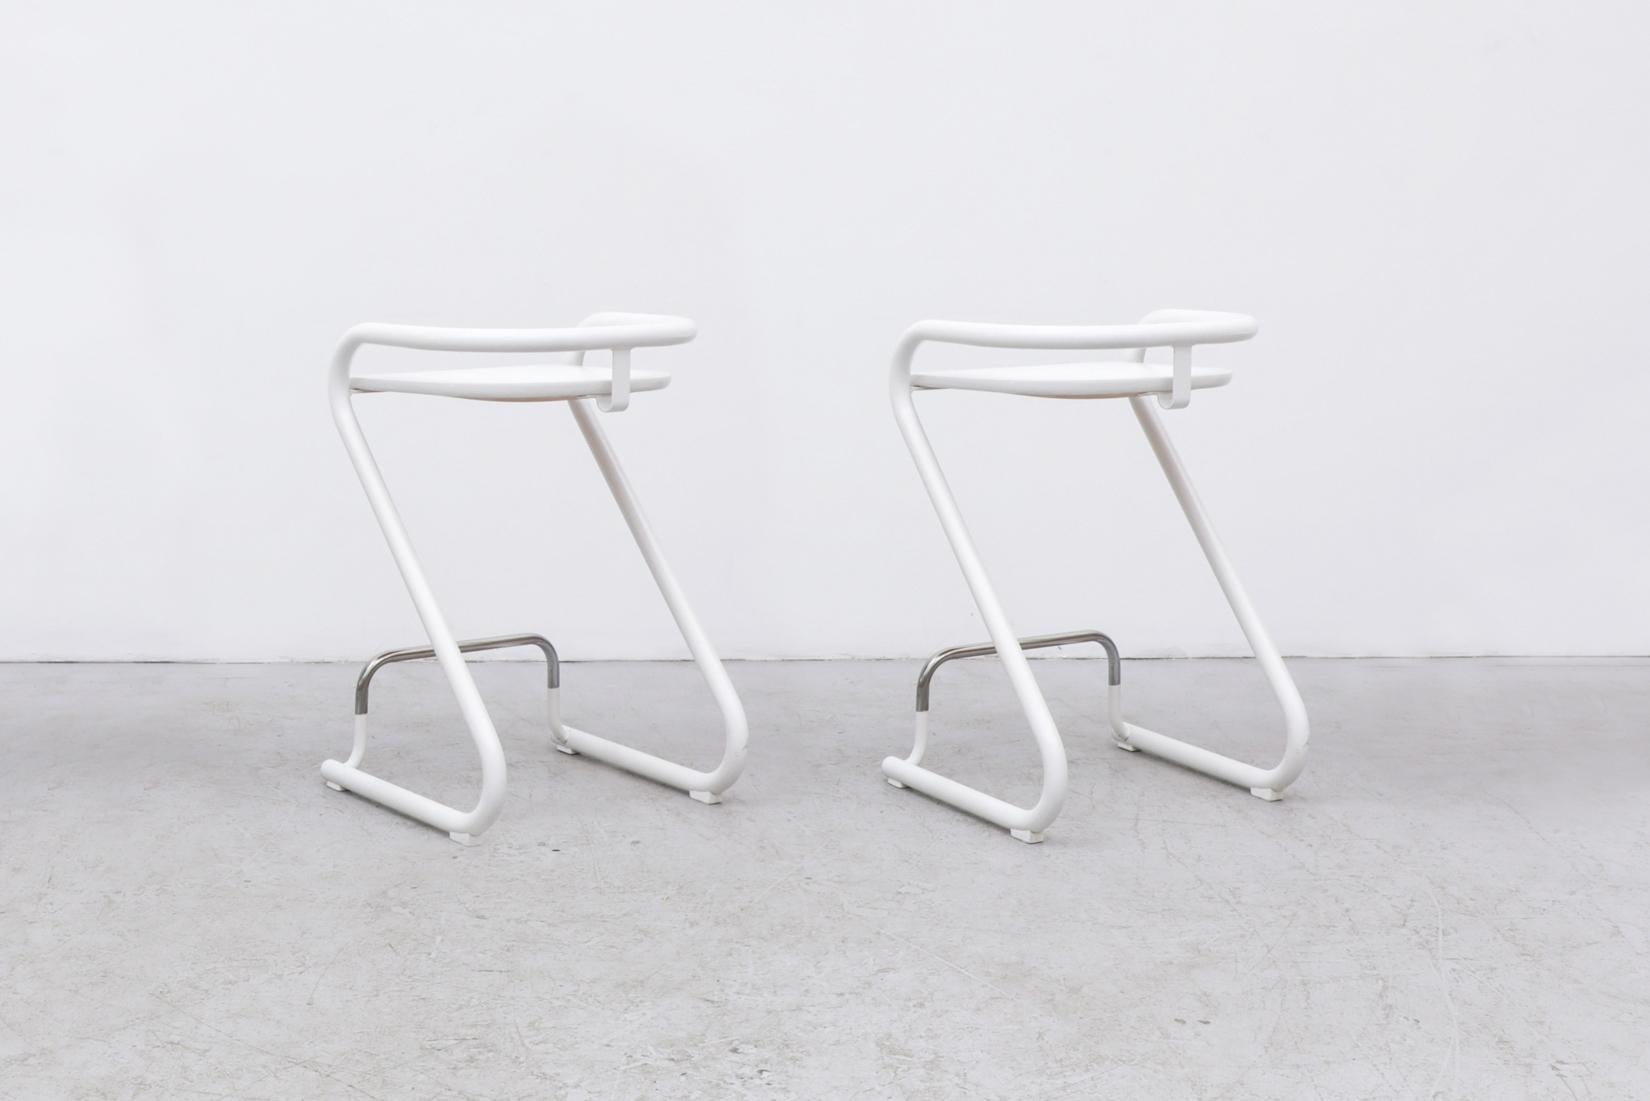 Model S70-3 Stools by Borge Lindau & Bo Lindekrantz, 1960's. Funky white enameled tubular framed bar stools with chromed foot rest and painted white seats. They have been lightly touched up and are in otherwise original condition with normal wear